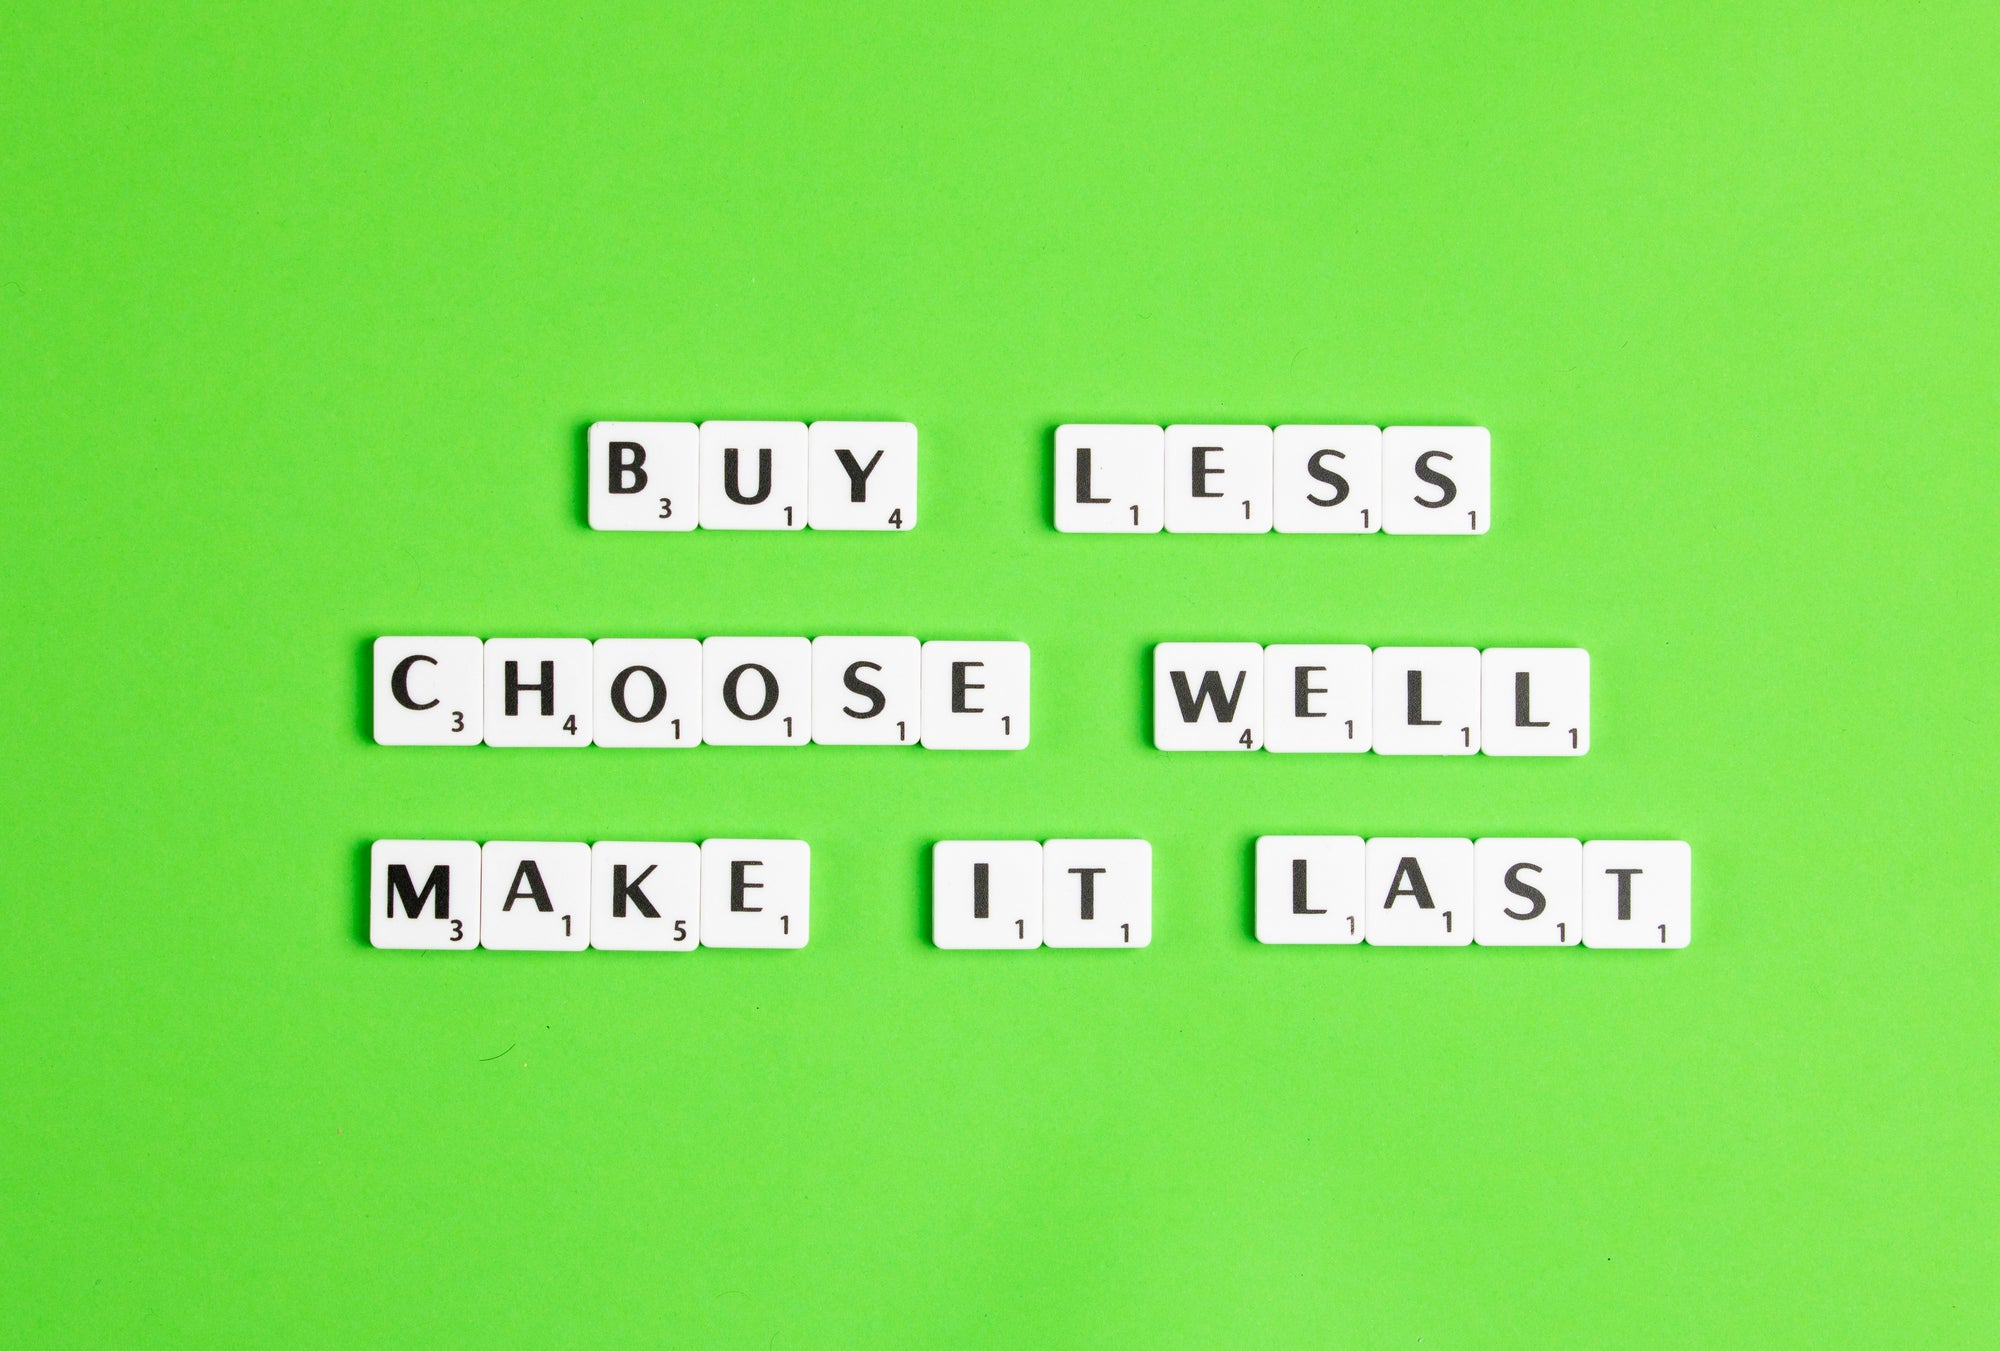 Letter tiles on a green background that spell out "Buy less, choose well, make it last."